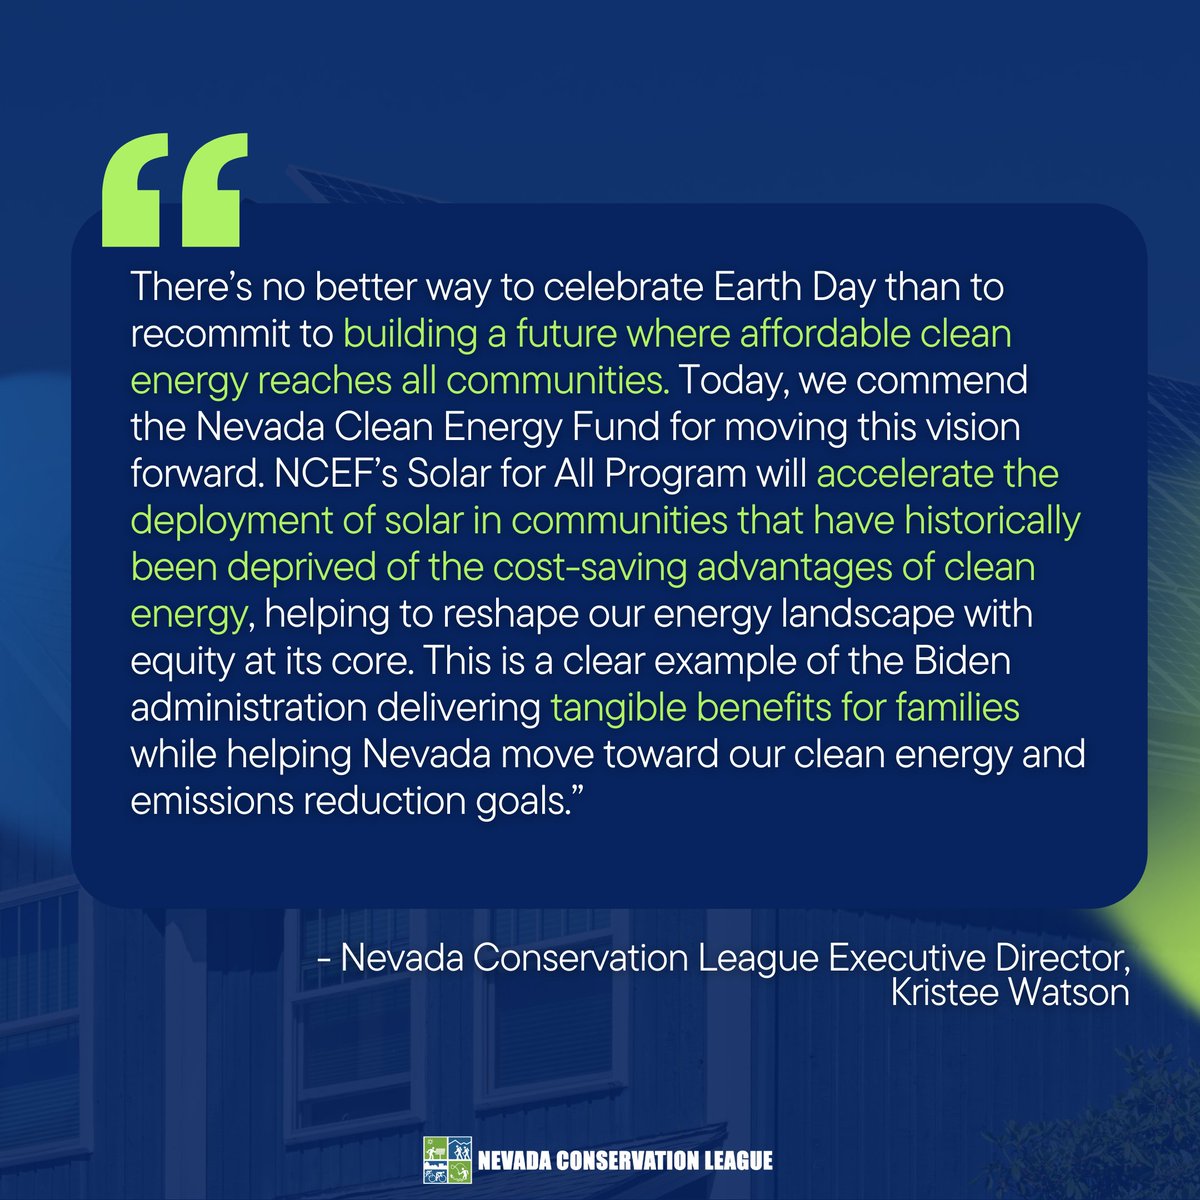 🚨 #BREAKINGNEWS: @NevadaCEF secures $1⃣5⃣6⃣,0⃣0⃣0⃣,0⃣0⃣0⃣ #SolarForAll grant on #EarthDay! 🌎 'This is a monumental win for Nevada's #CleanEnergy future,' says Kristee Watson, NCL's ED. *READ* our statement⬇️: nevadaconservationleague.org/nevada-clean-e…